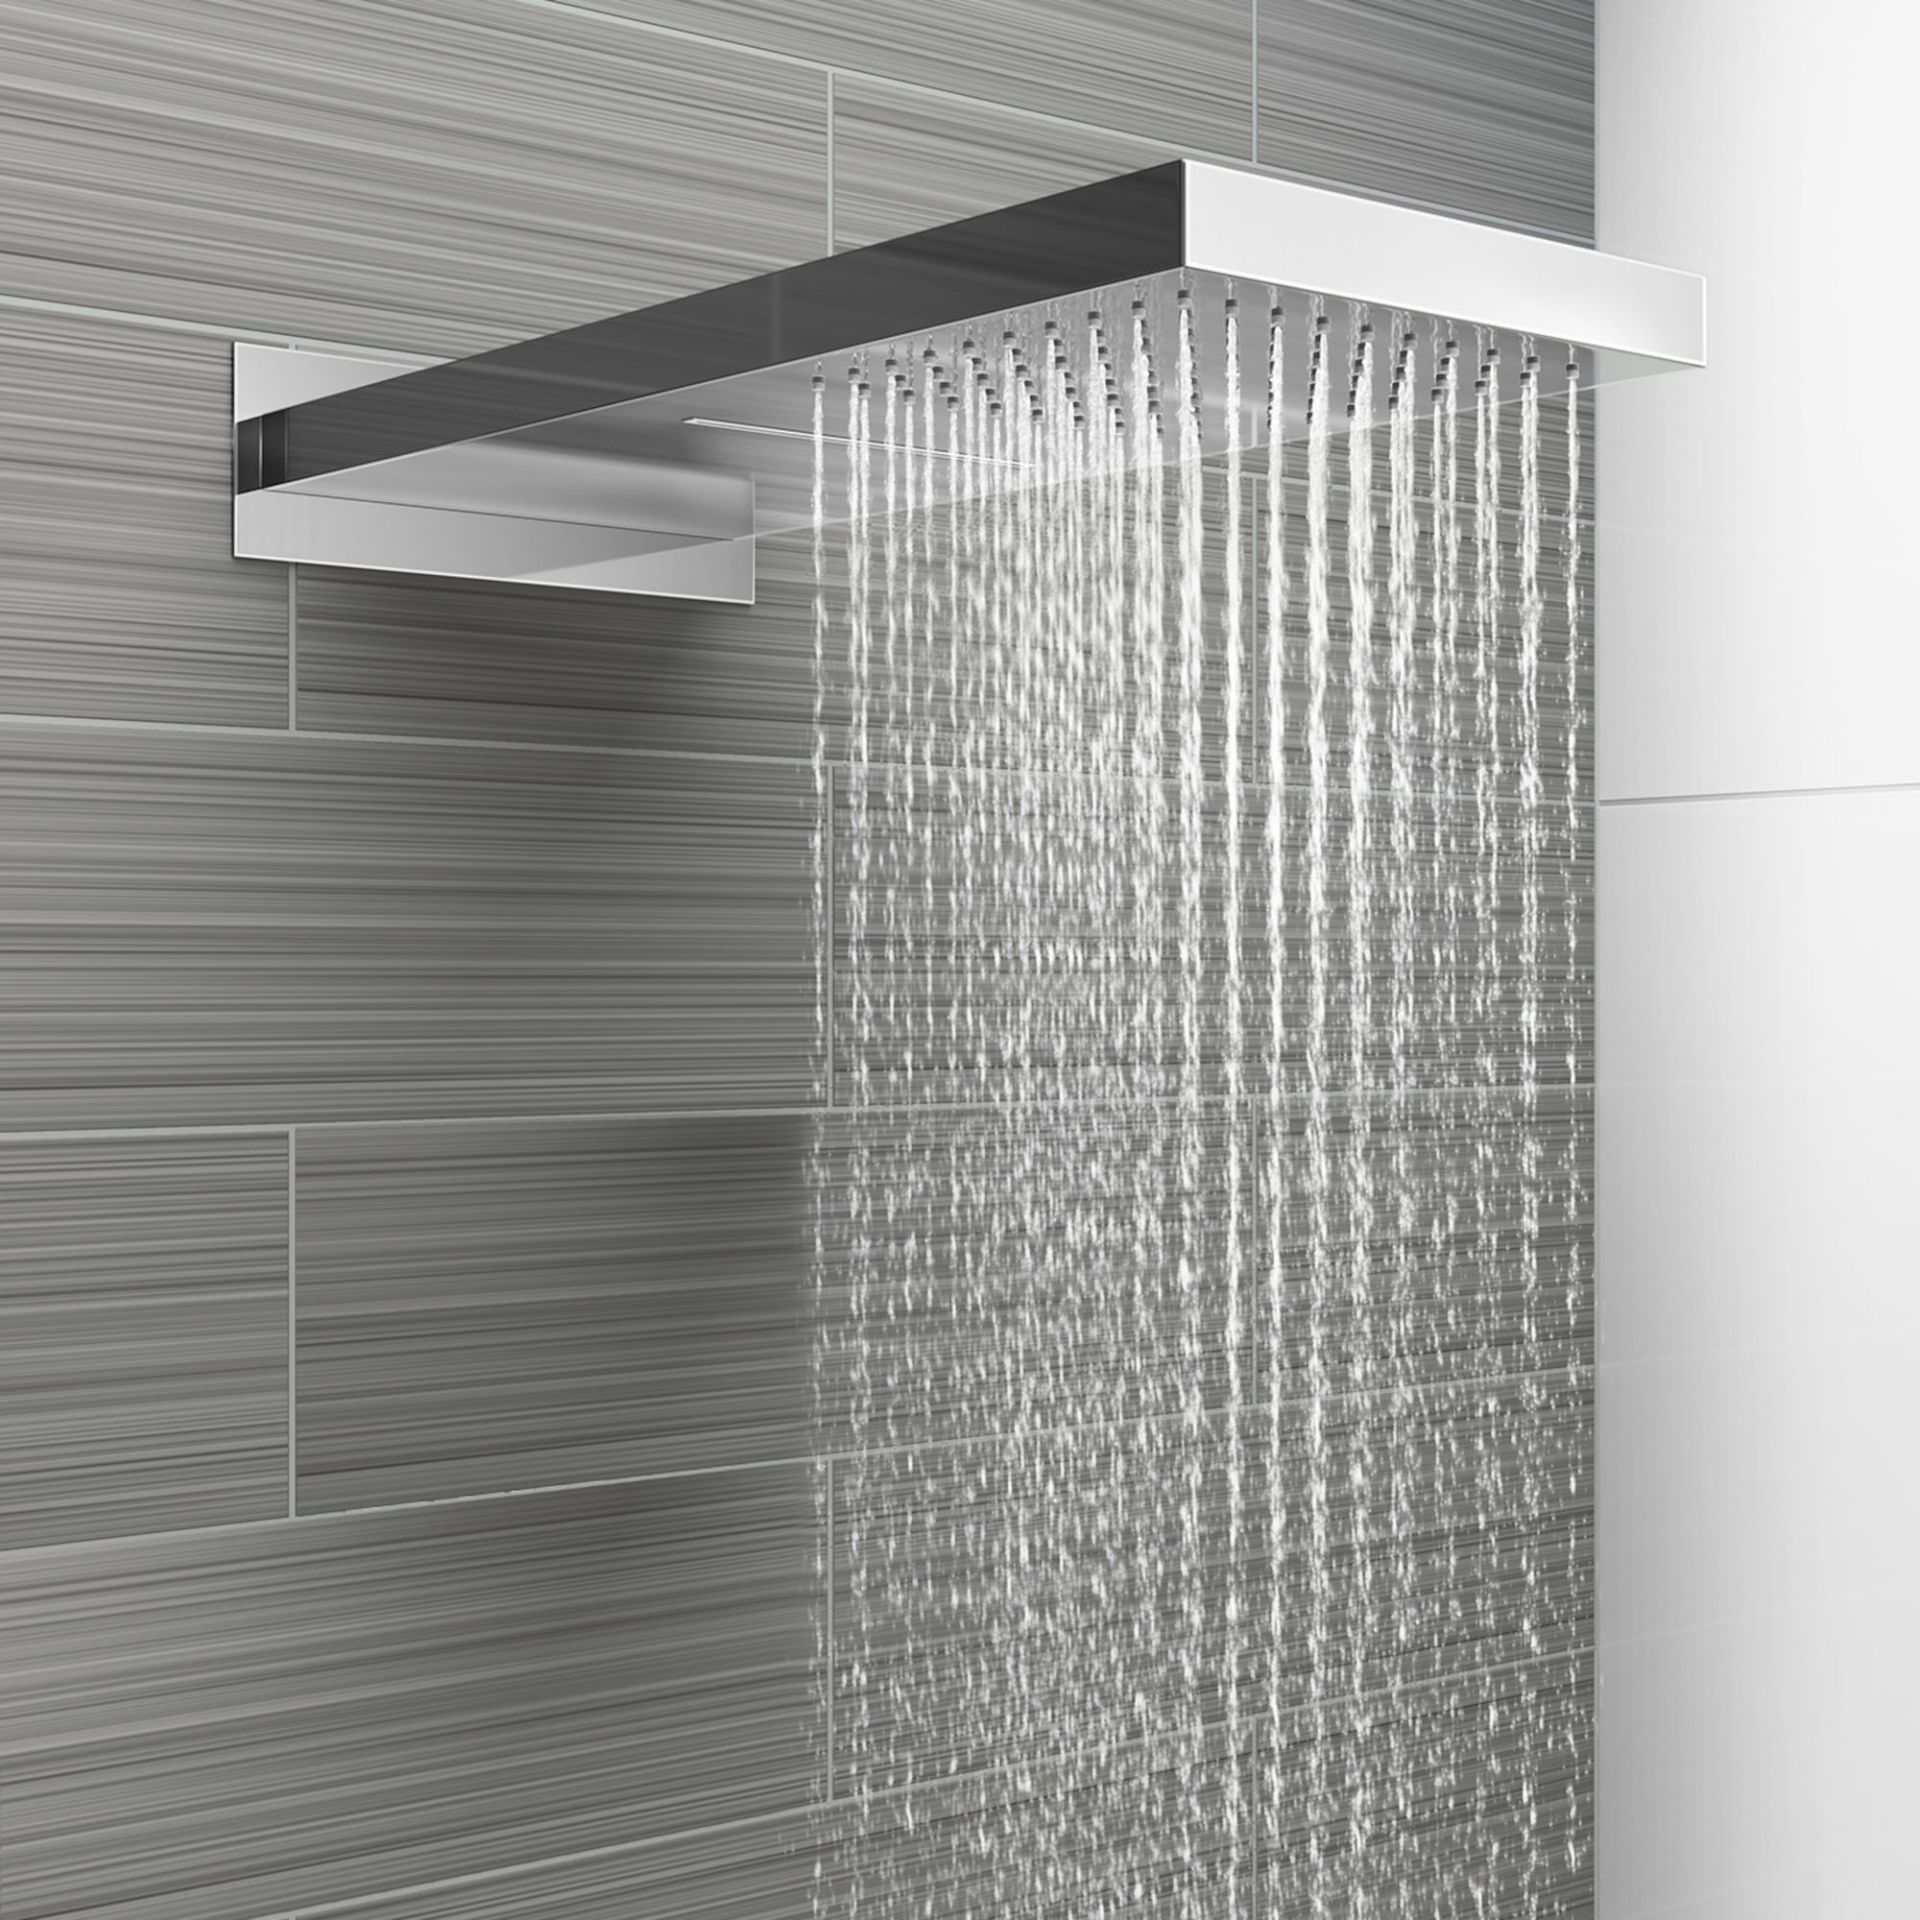 (TY171) 230x500mm Stainless Steel Waterfall Shower Head. RRP £374.99. Dual function waterfall and - Image 3 of 4